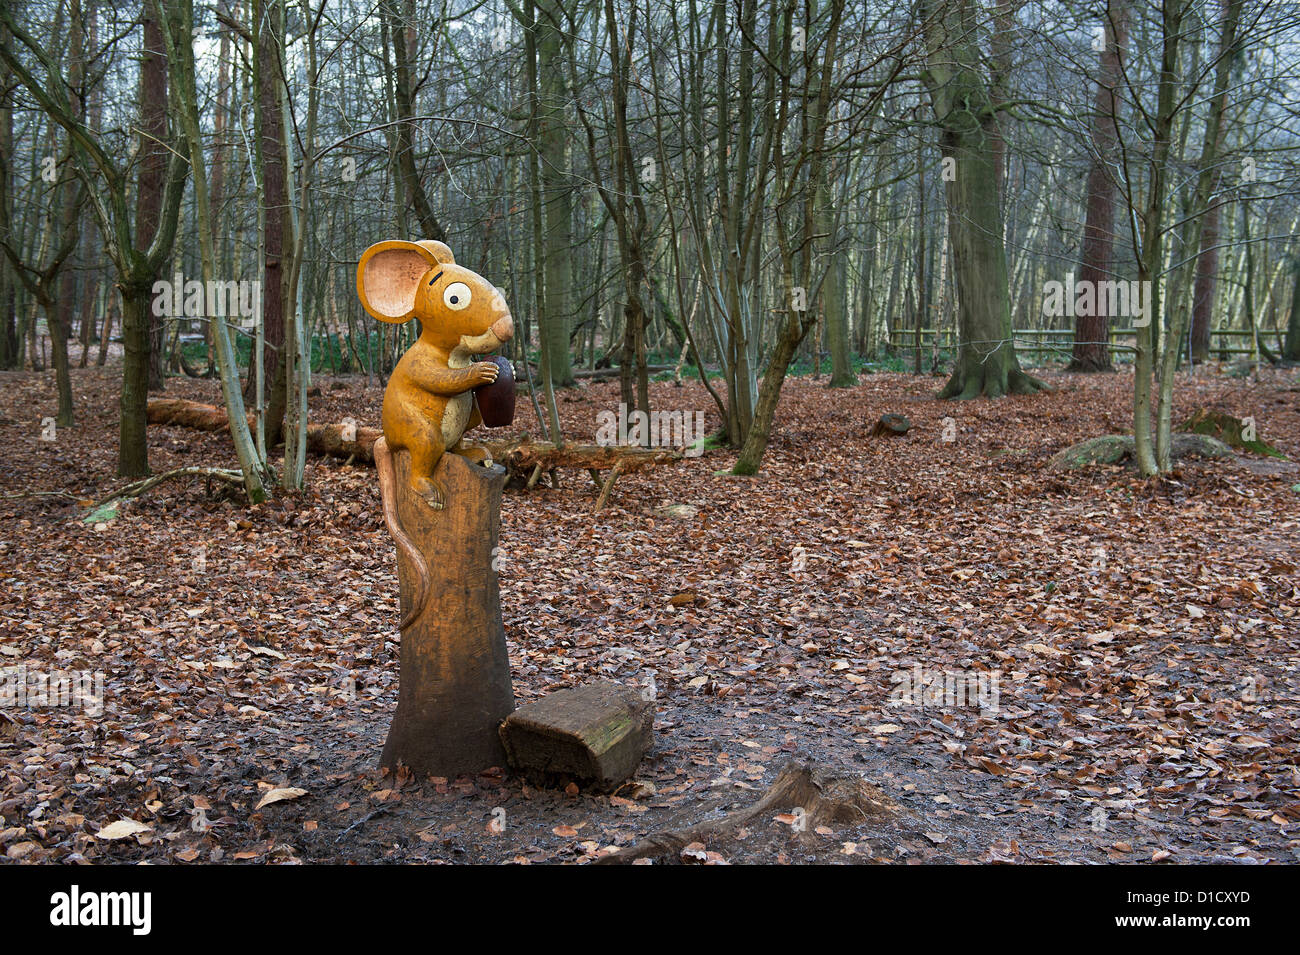 A wooden sculpture of a mouse eating an acorn in Thorndon Country Park in Essex. Stock Photo